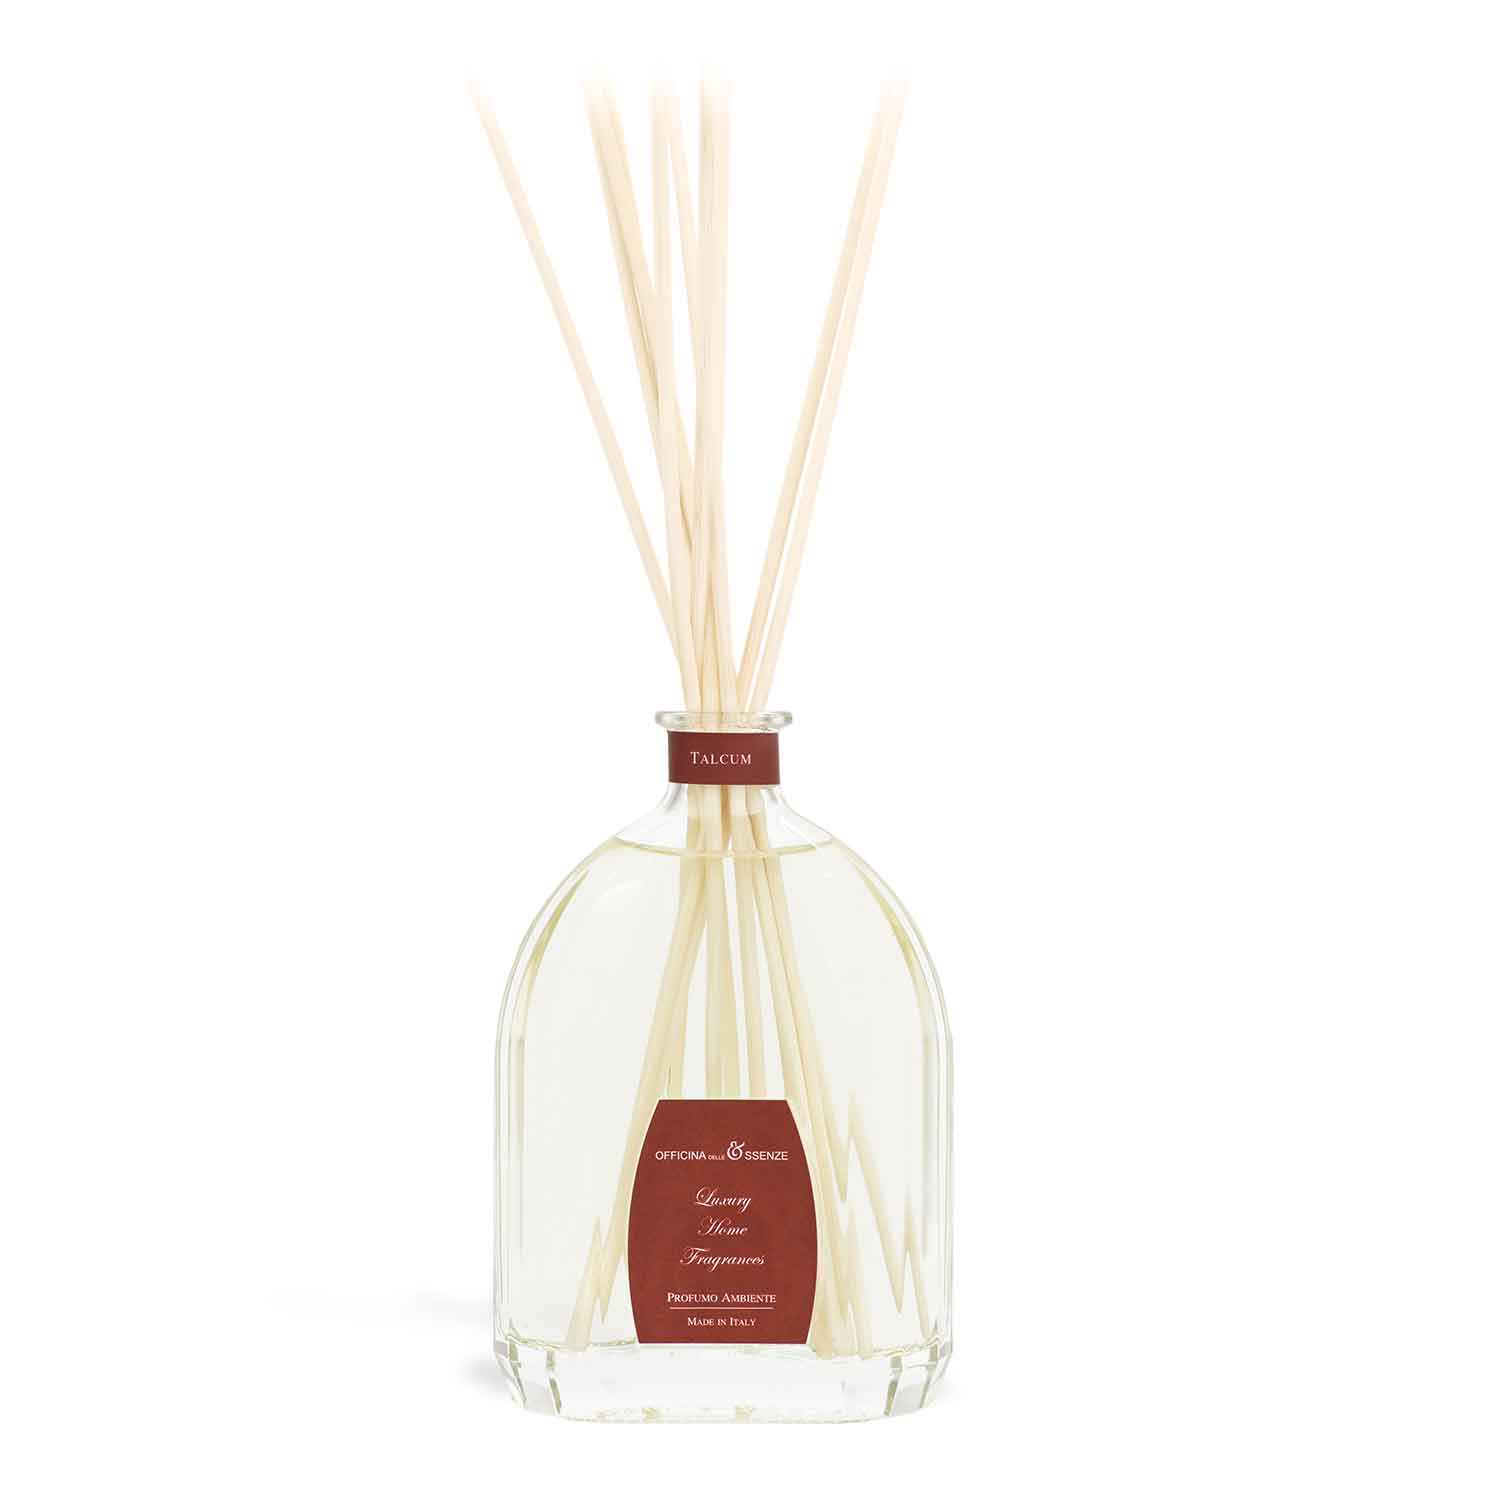 Talcum - Home fragrance diffuser with essential oils, 500 ml